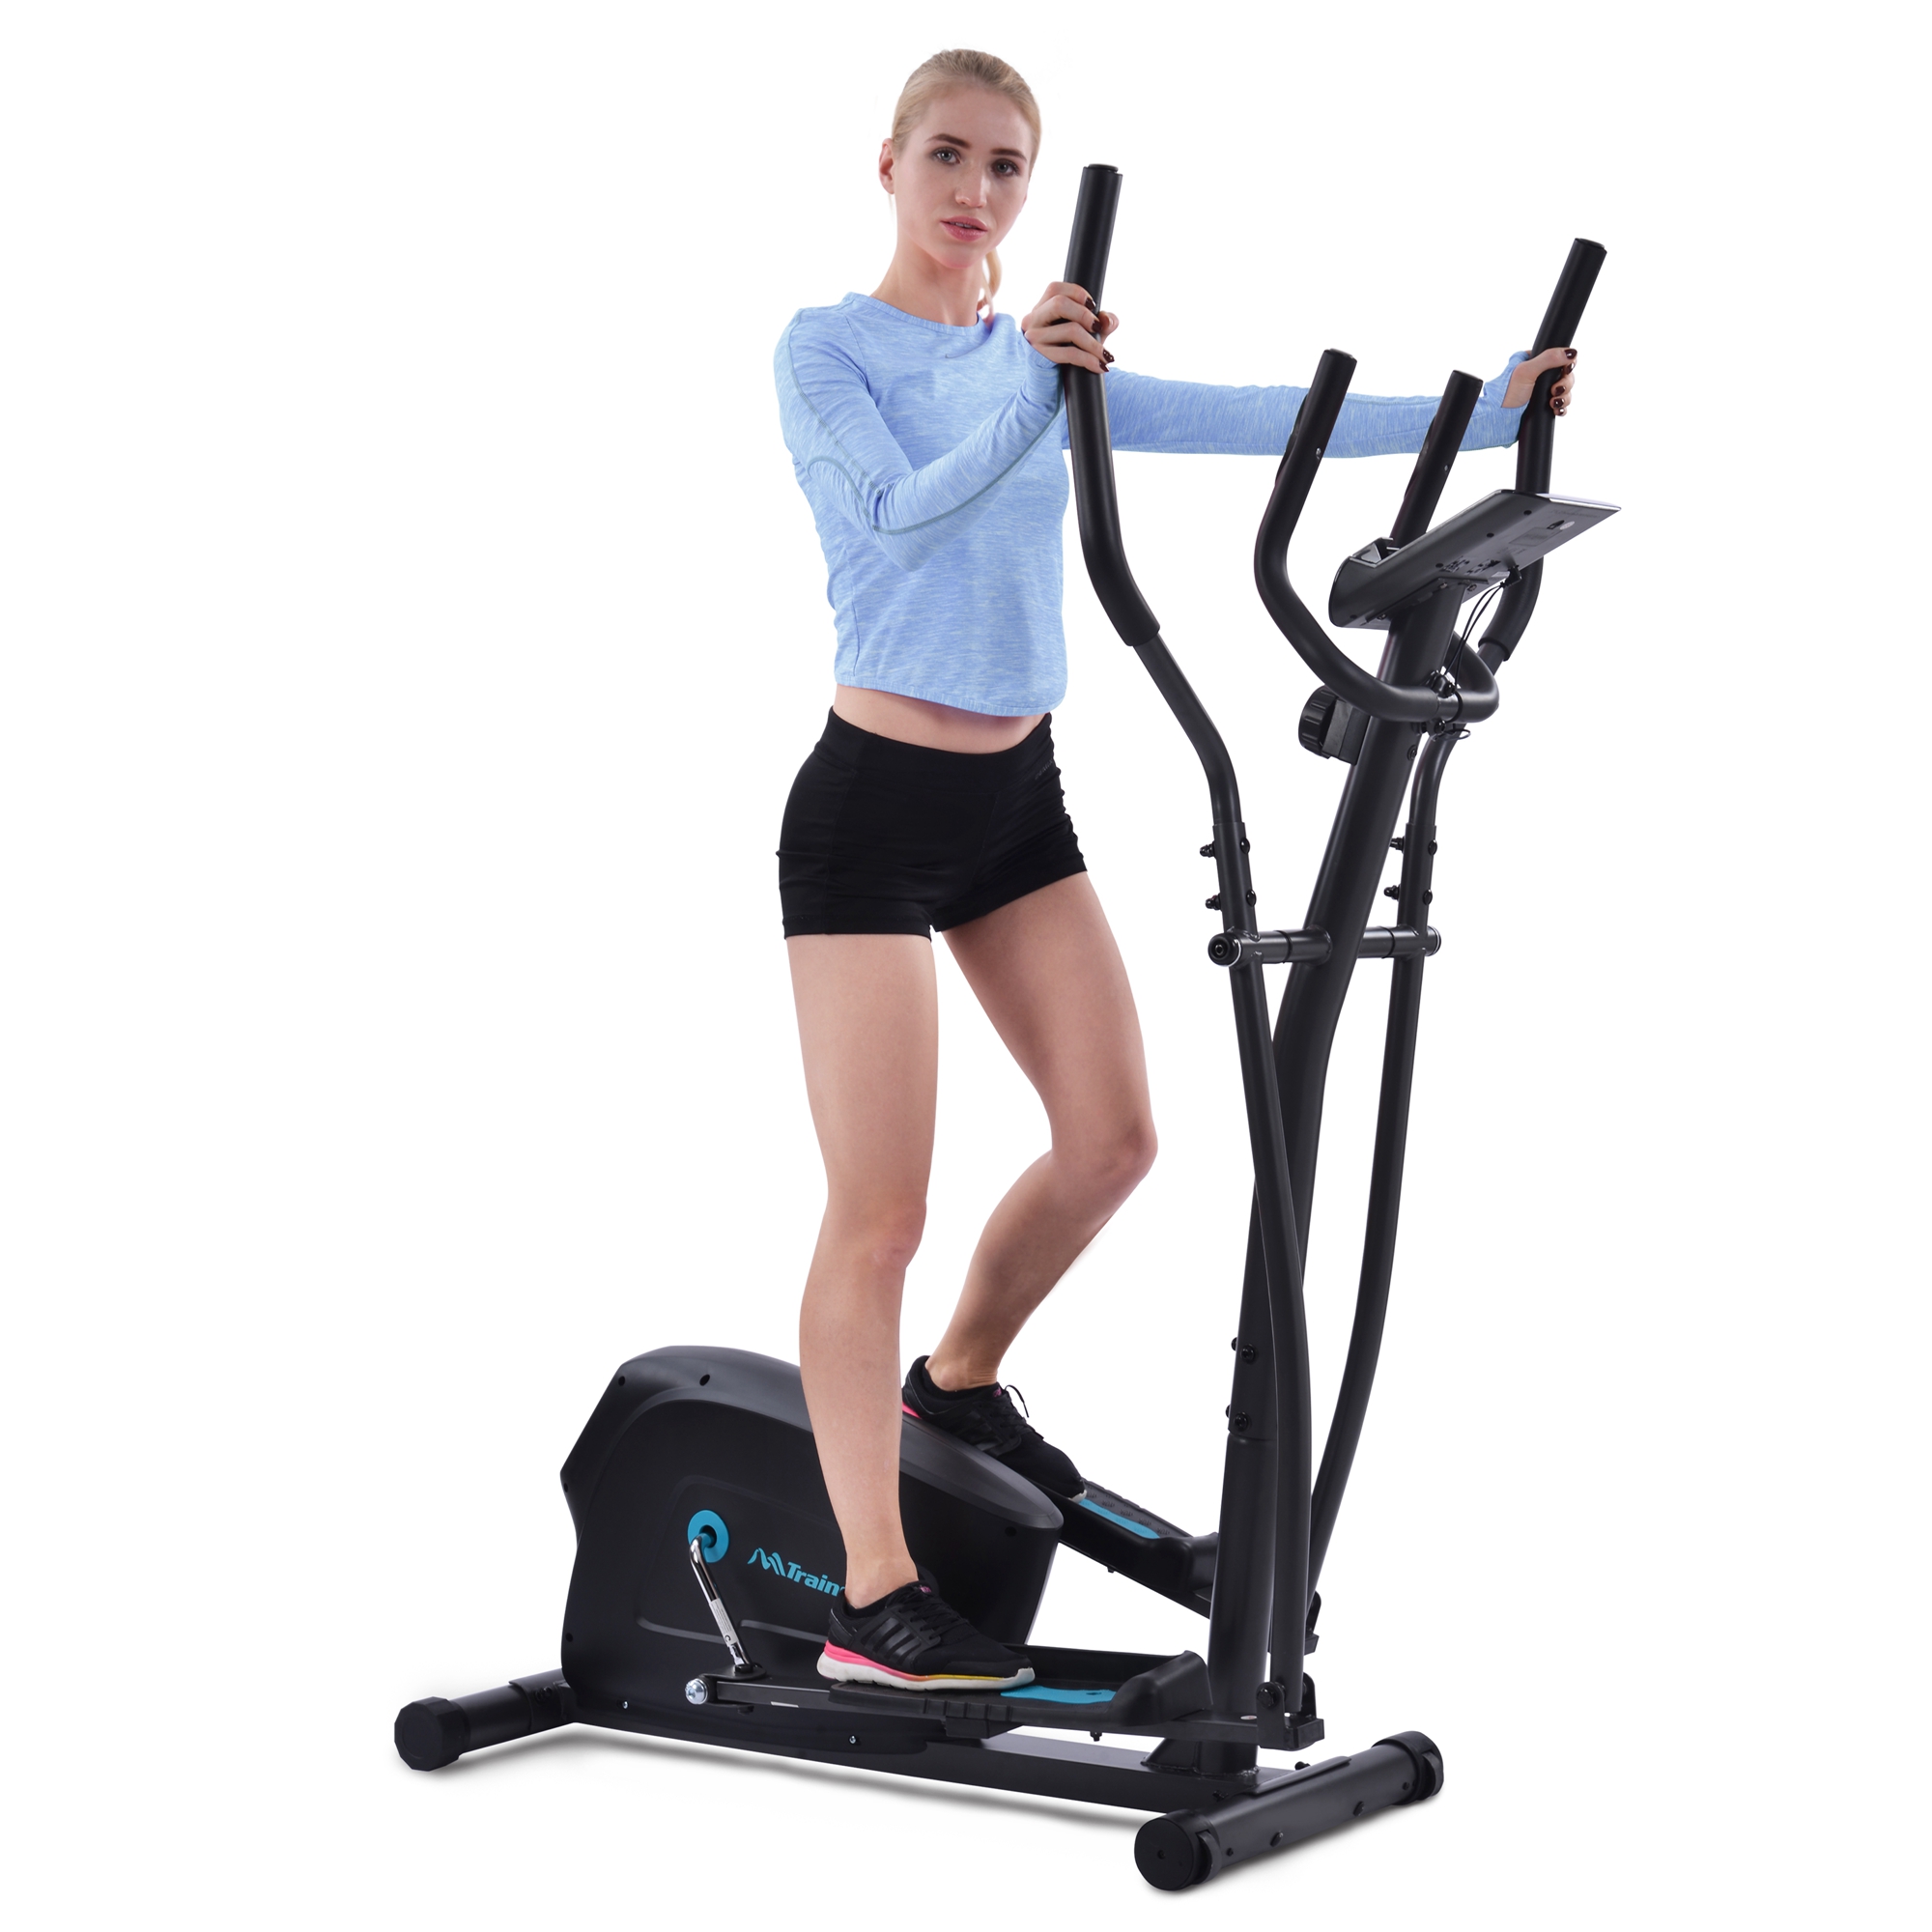 Elliptical Trainer Machine Upright Exercise Bike with 8-Level Magnetic Resistance for Home Gym Cardio Workout-CASAINC